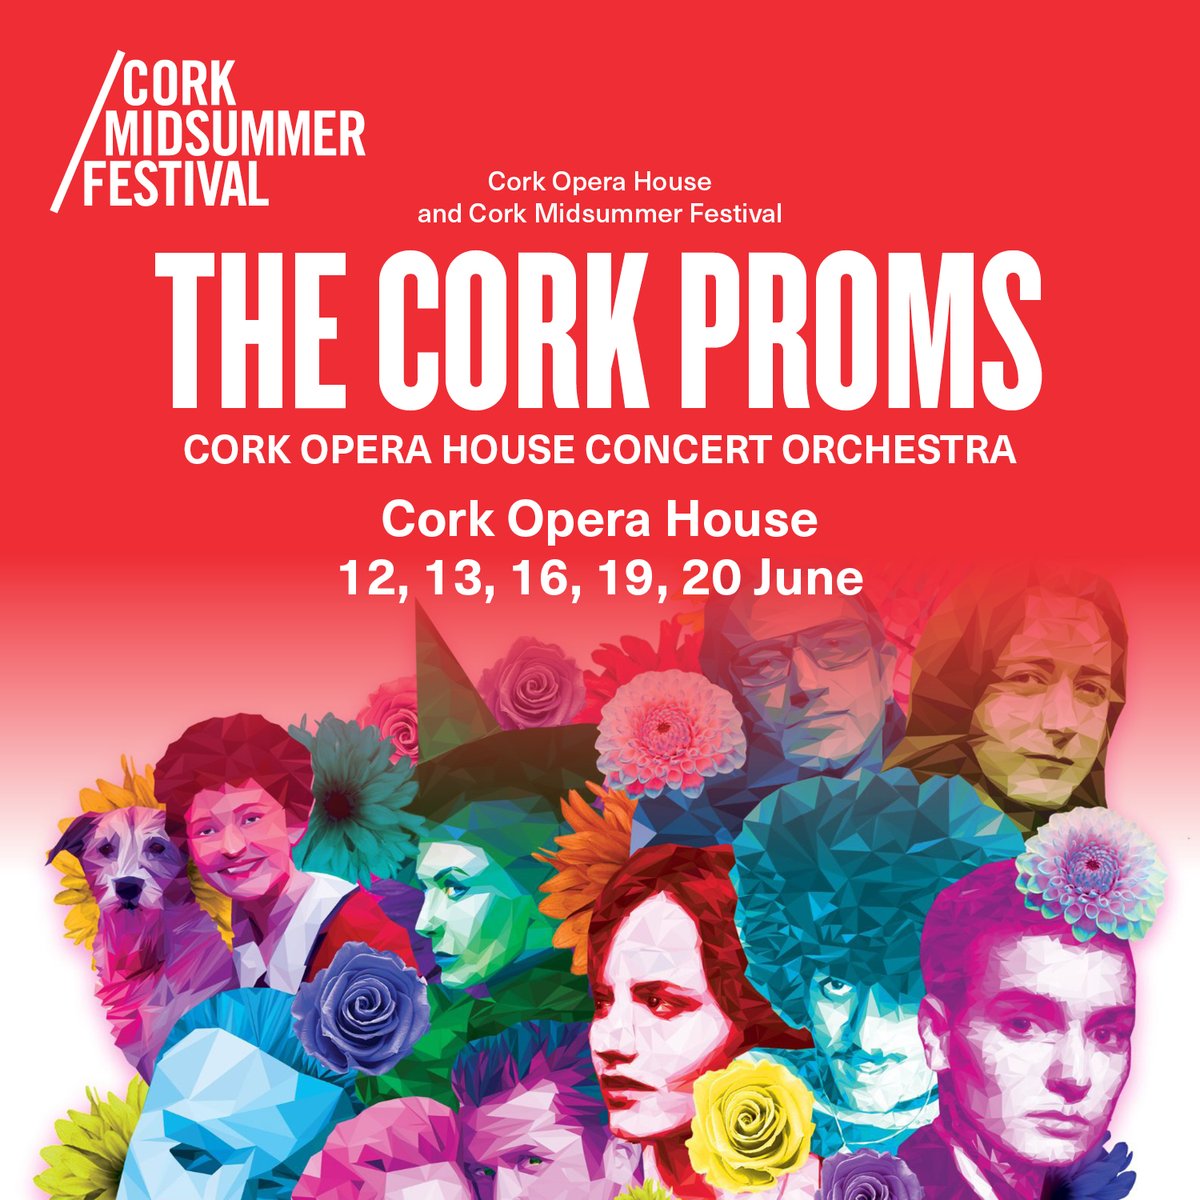 Bringing together some of Cork and Ireland’s finest musicians and performers to celebrate a mix of contemporary and classical music alongside the Cork Opera House Concert Orchestra. 📆 12, 13, 16, 19, 20 June at @CorkOperaHouse. Tickets from corkmidsummer.com.